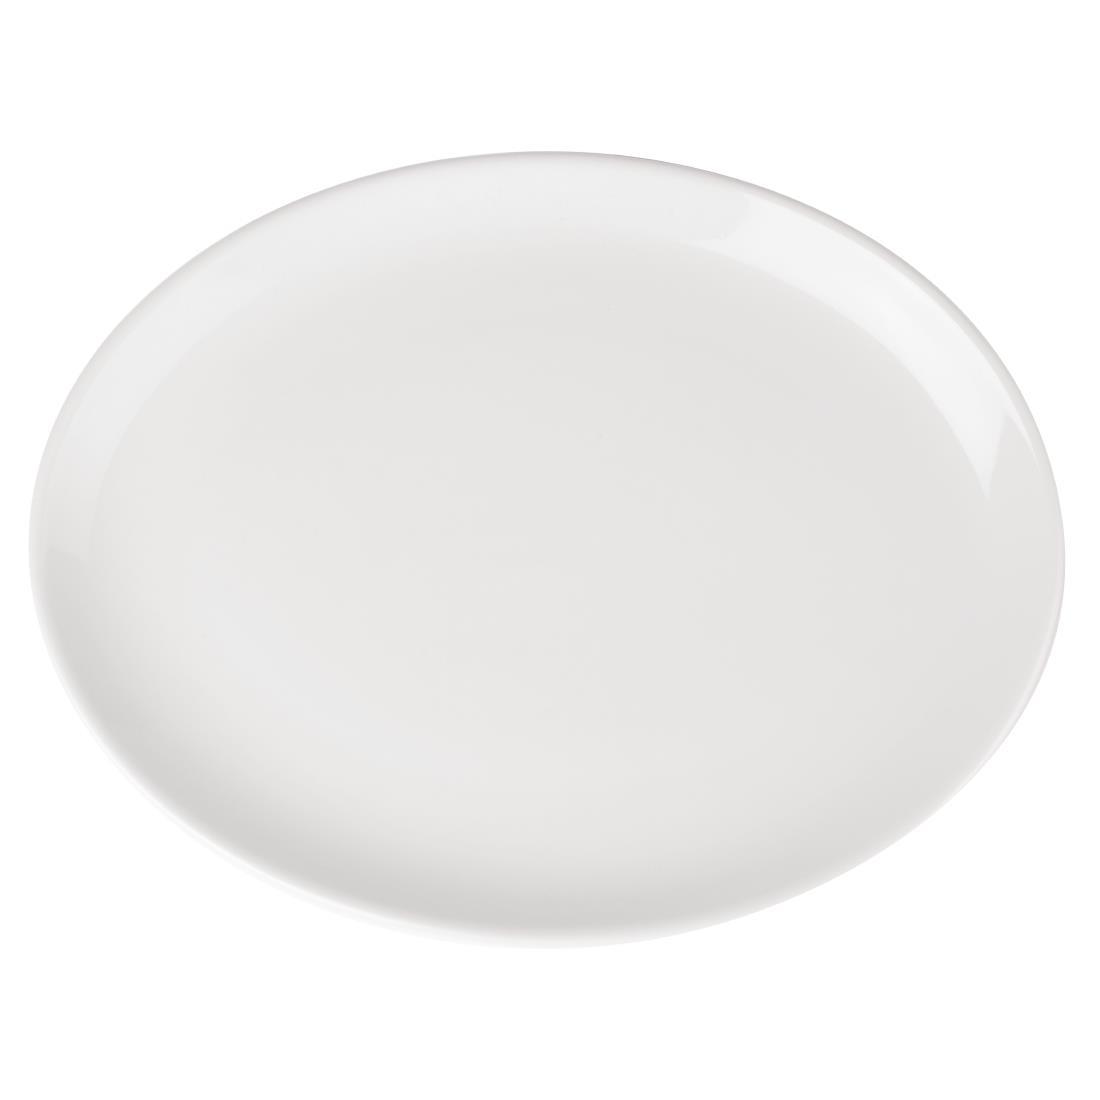 Olympia Athena Oval Coupe Plates 305 x 241 mm (Pack of 6) - CC212  - 4